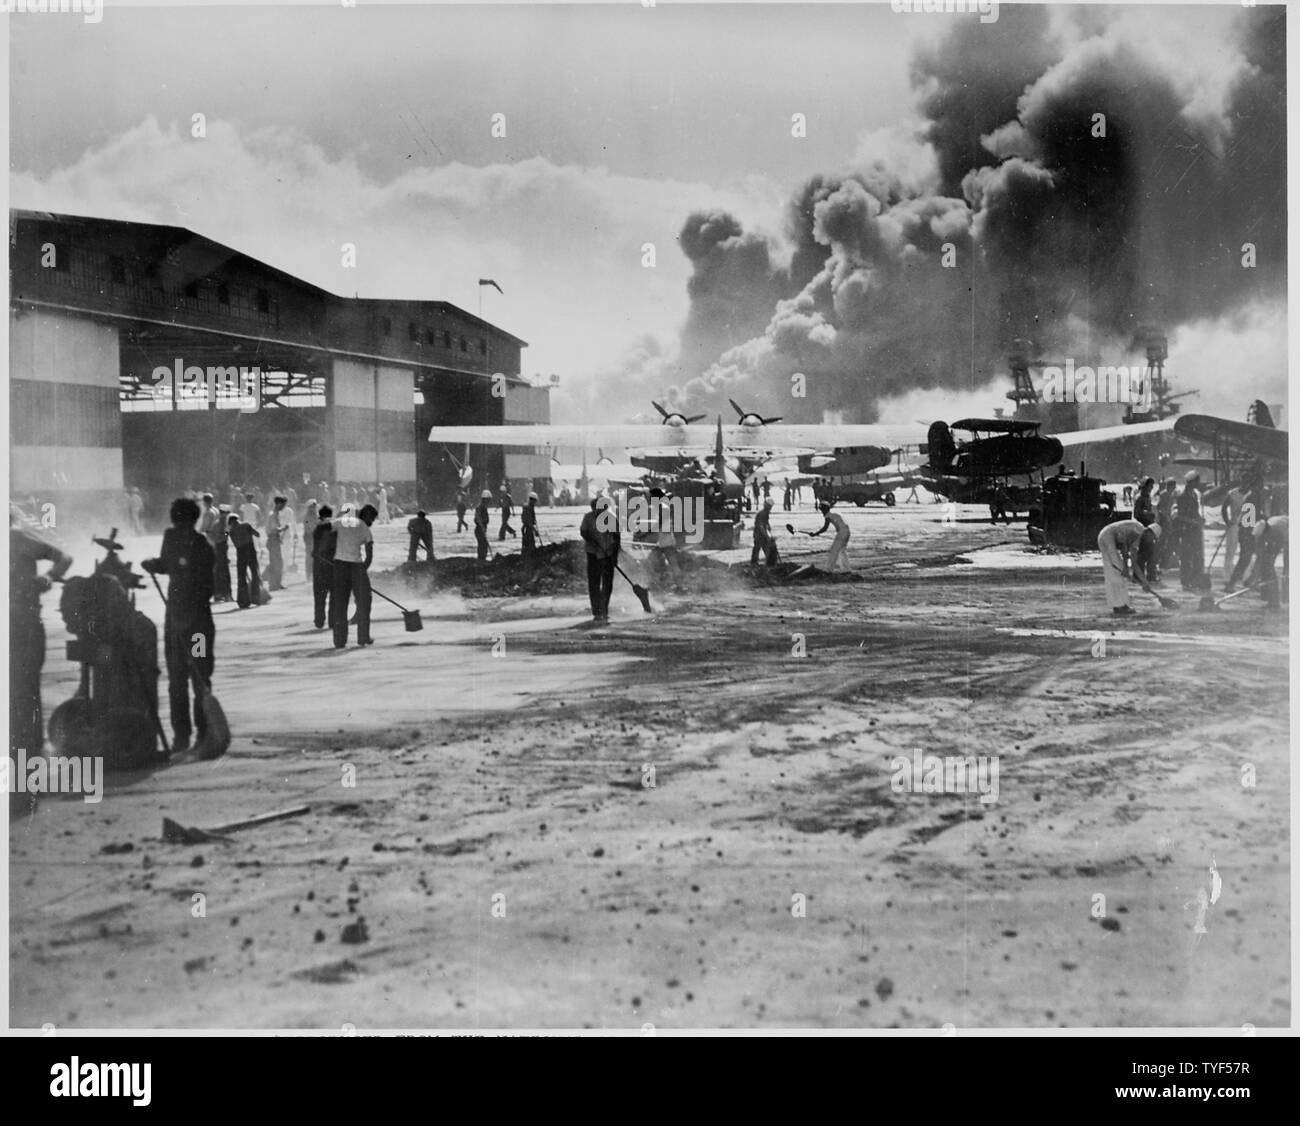 Photograph of the Repairs to the Apron at the Ford Island Naval Air Station, Hawaii; Scope and content:  This is a naval photograph documenting the Japanese attack on Pearl Harbor, Hawaii that initiated the United States' participation in World War II.   Original caption: Cleaning up the apron at Ford Island, Naval Air Station at Pearl Harbor, after the Japanese attack on Dec. 7, 1941. General notes:  This photograph was originally taken by a Naval photographer immediately after the Japanese attack on Pearl Harbor, but came to be filed in a writ of application for Habeas Corpus case number 298 Stock Photo